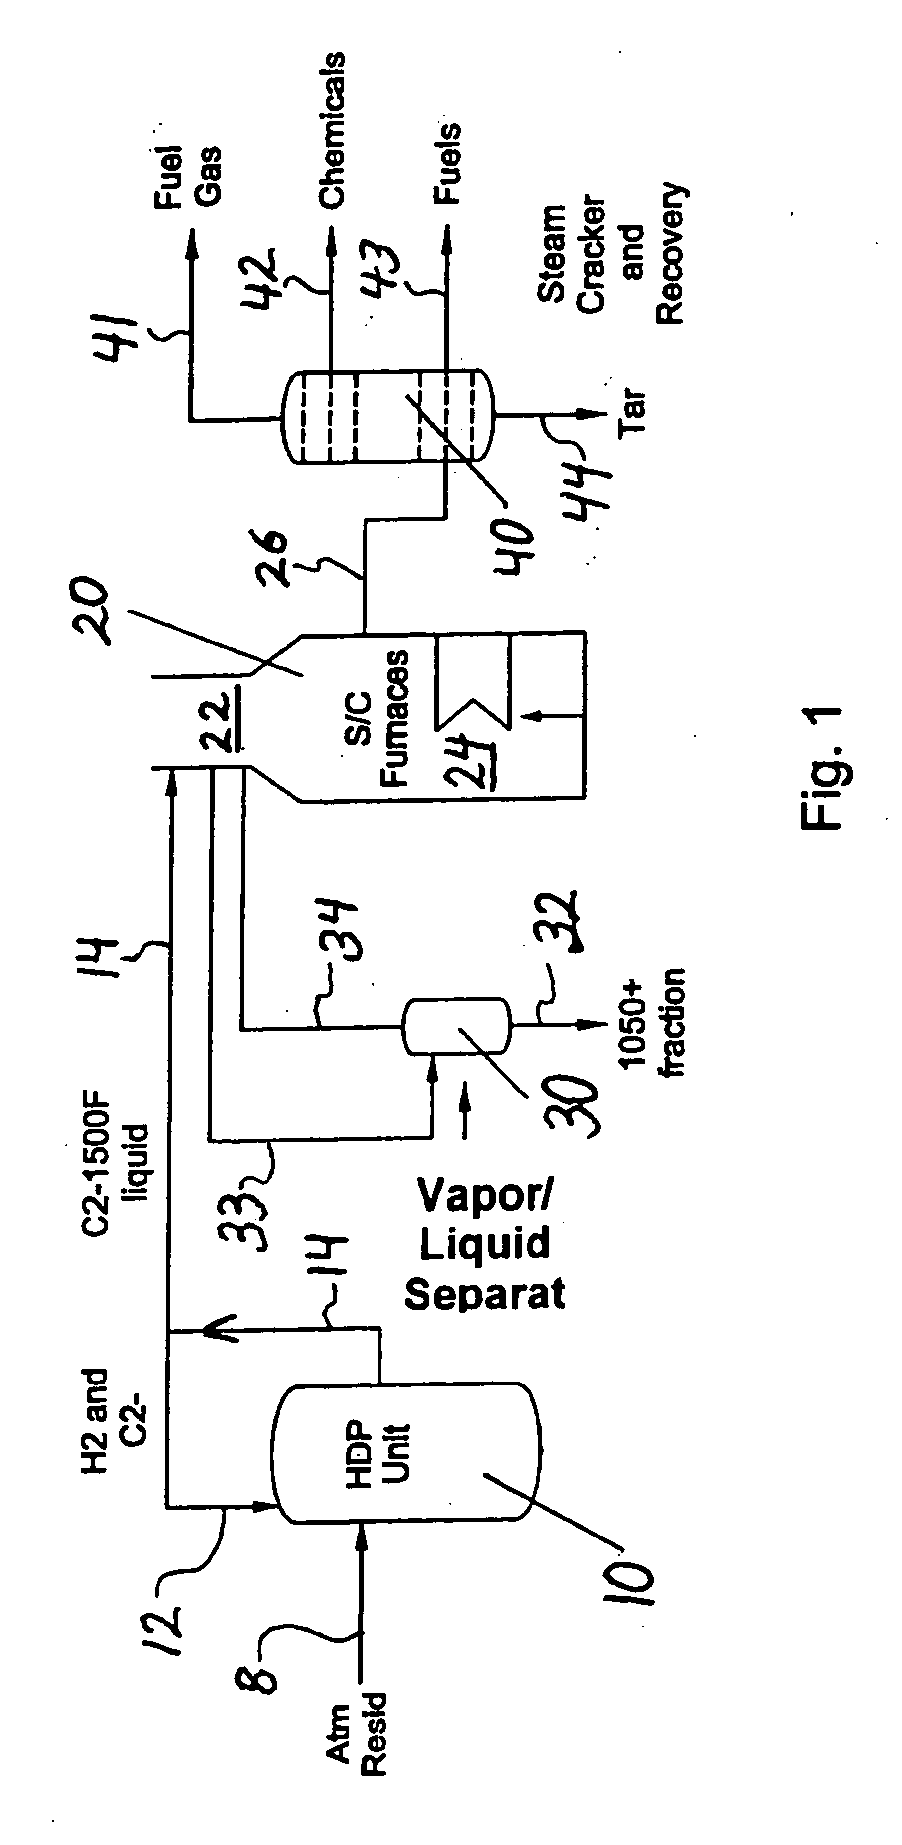 Resid processing for steam cracker feed and catalytic cracking